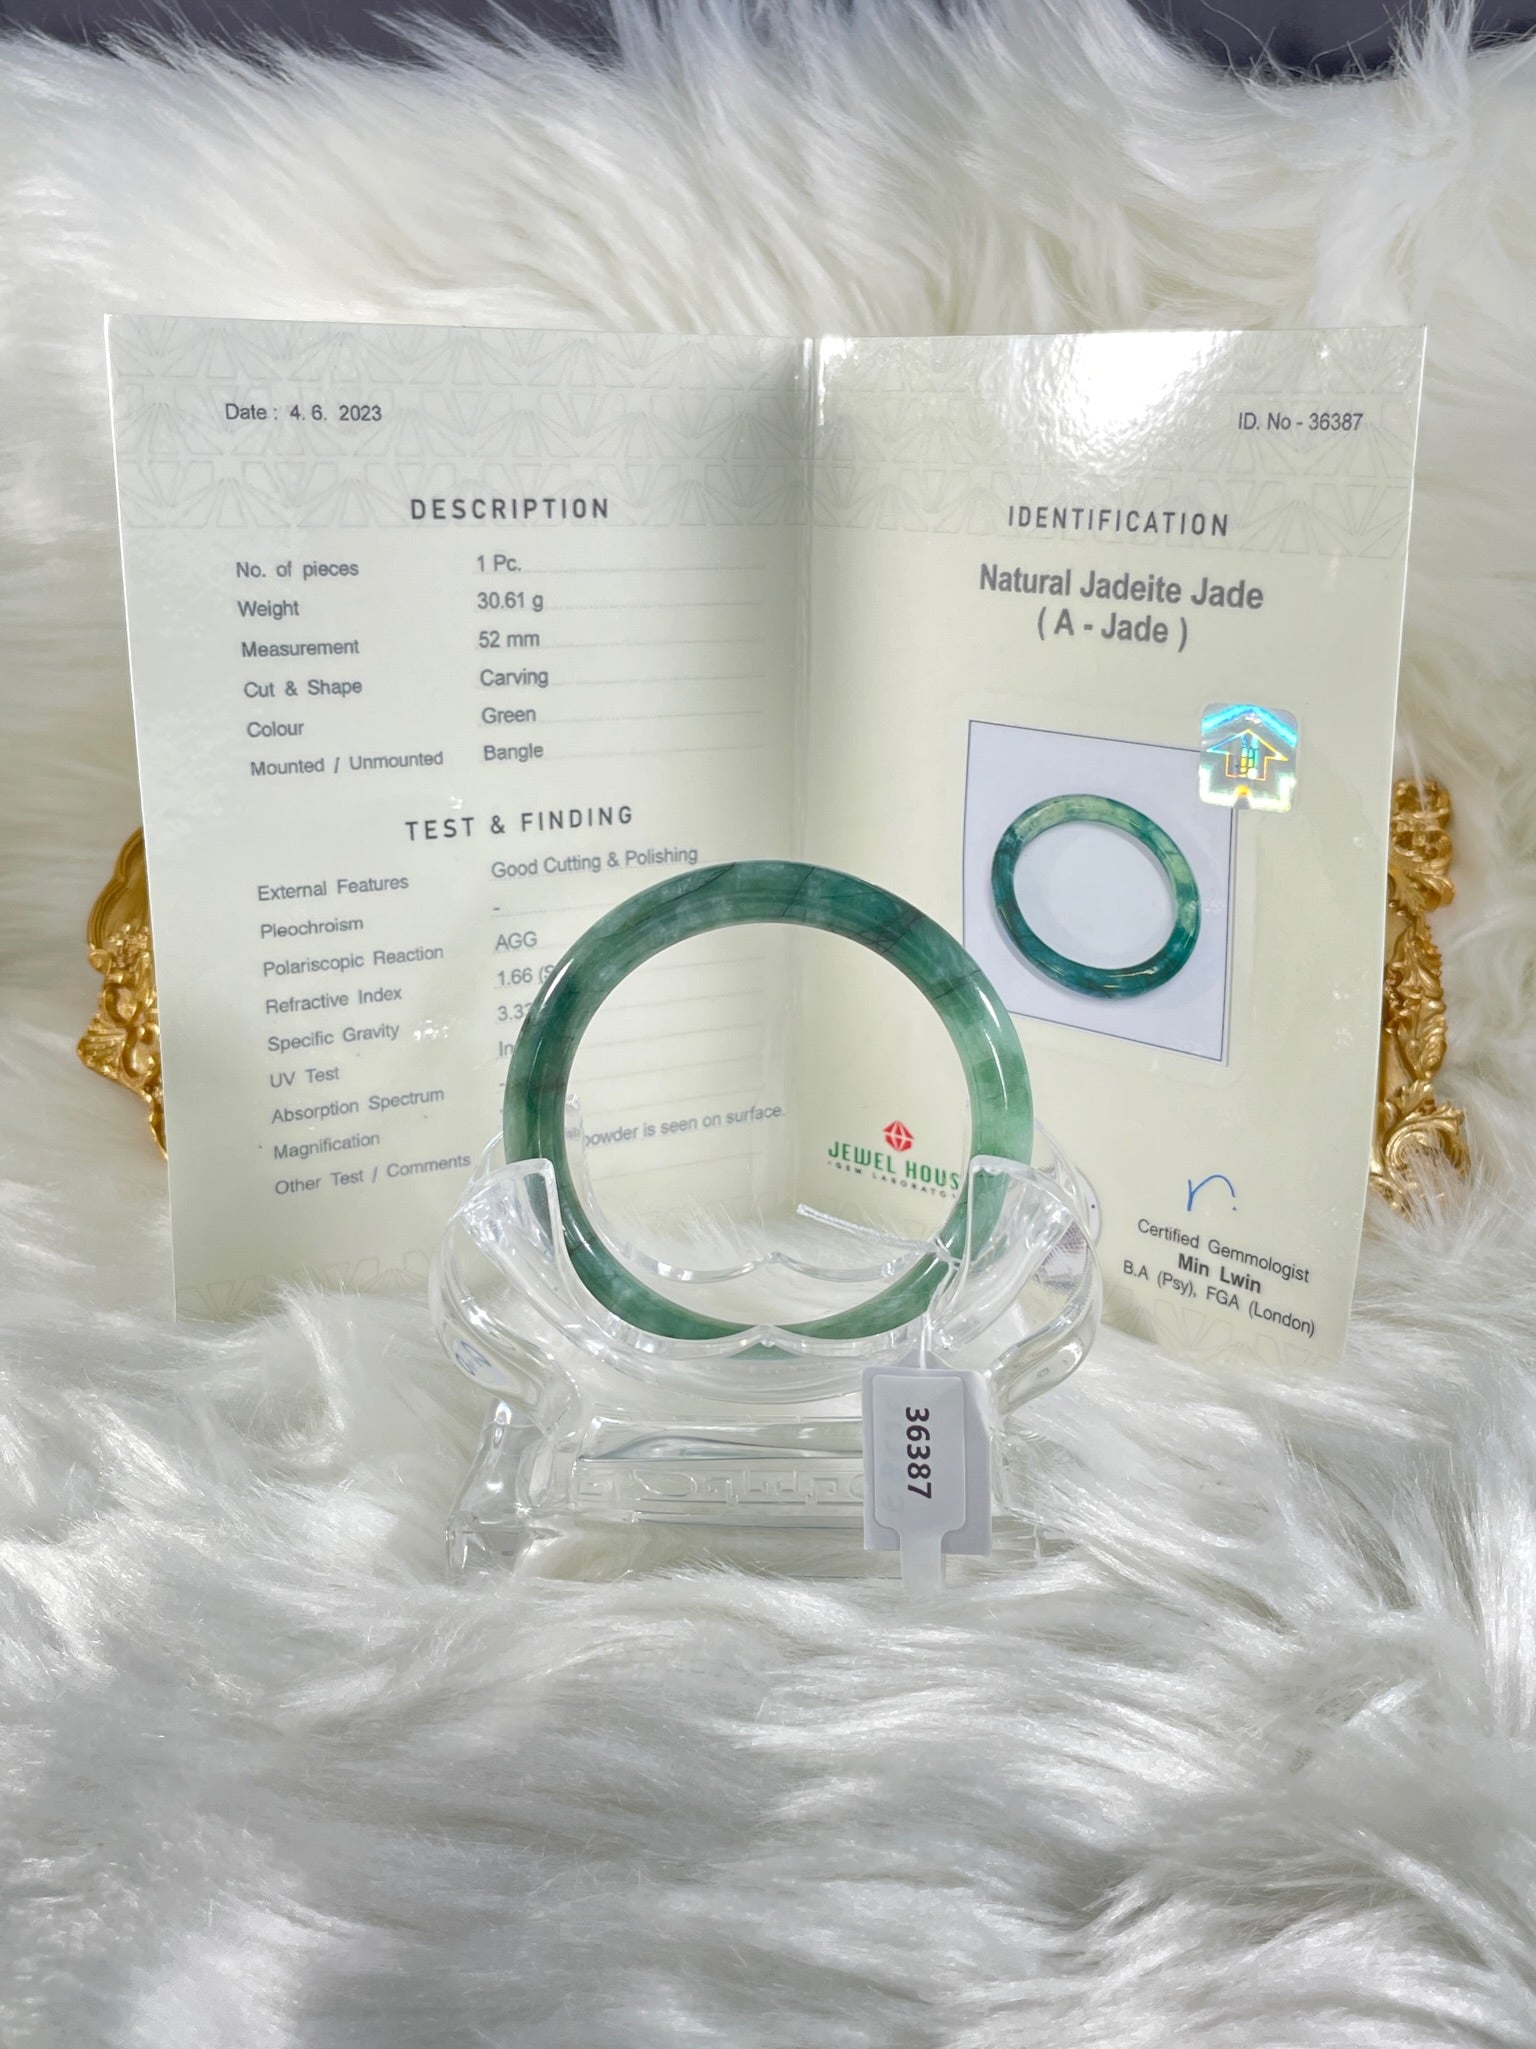 Grade A Natural Jade Bangle with certificate #36387